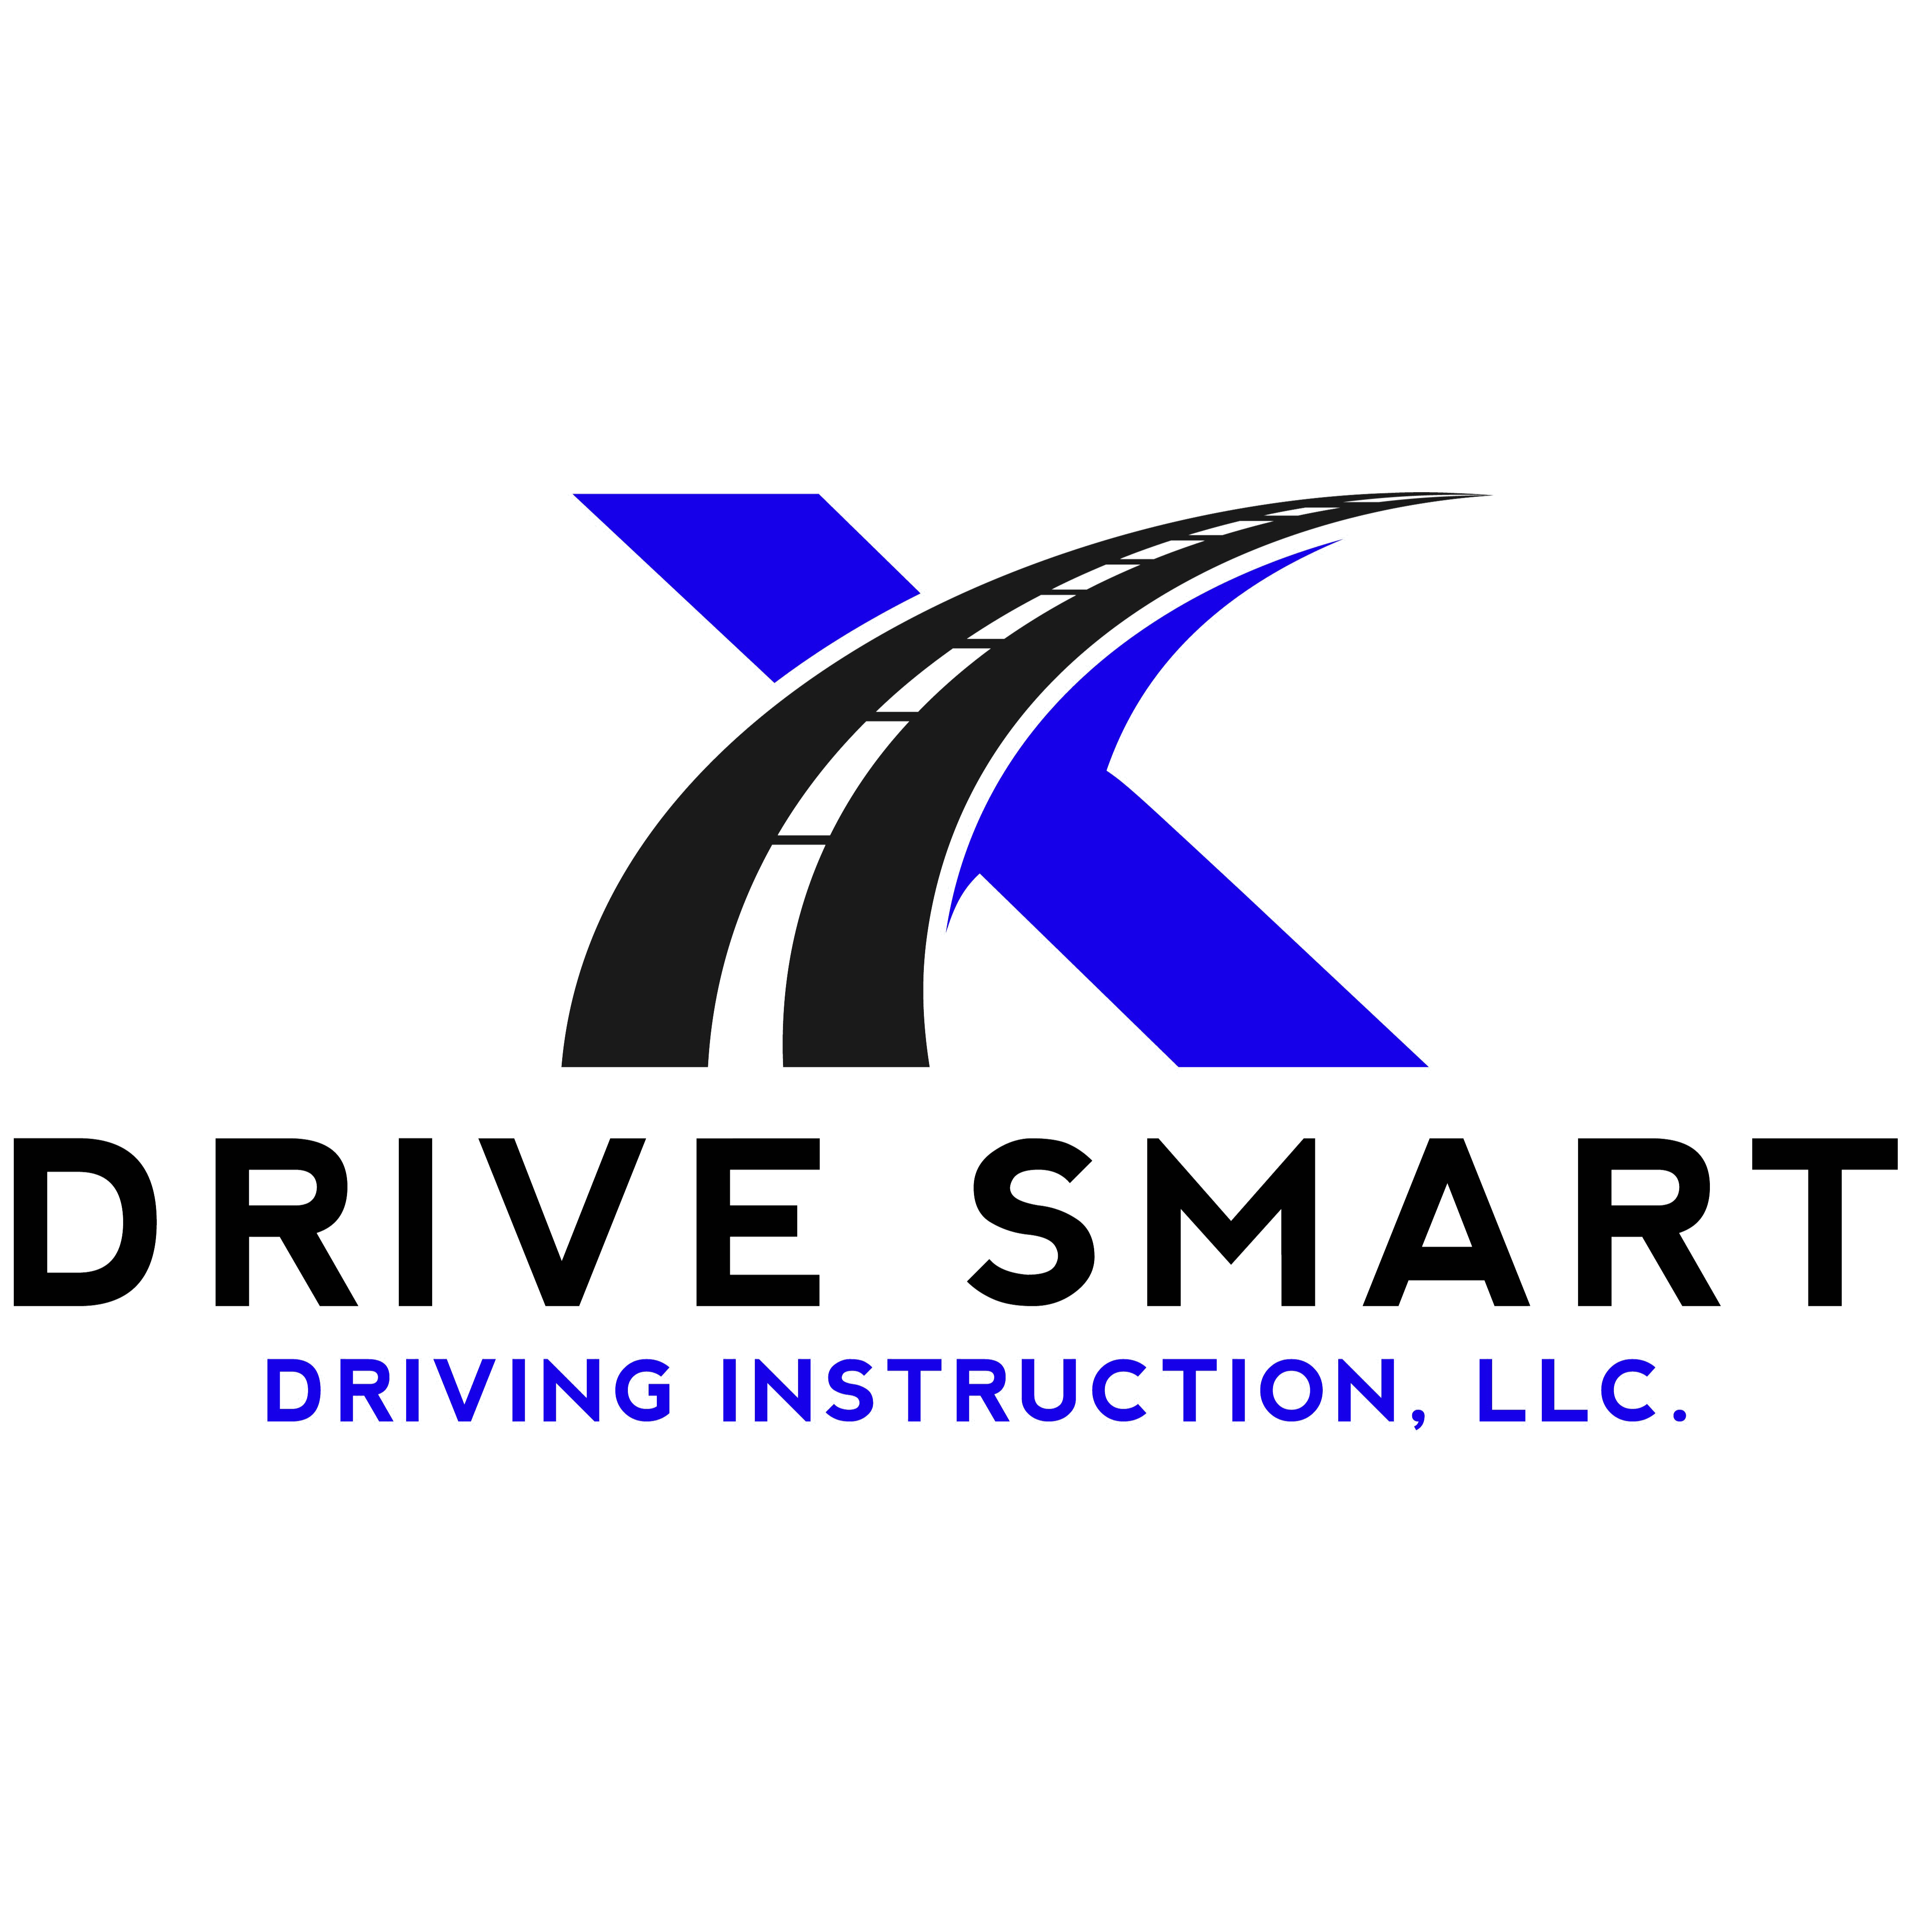 Drive Smart Driving Instruction - Michigan City, IN 46360 - (219)214-0222 | ShowMeLocal.com